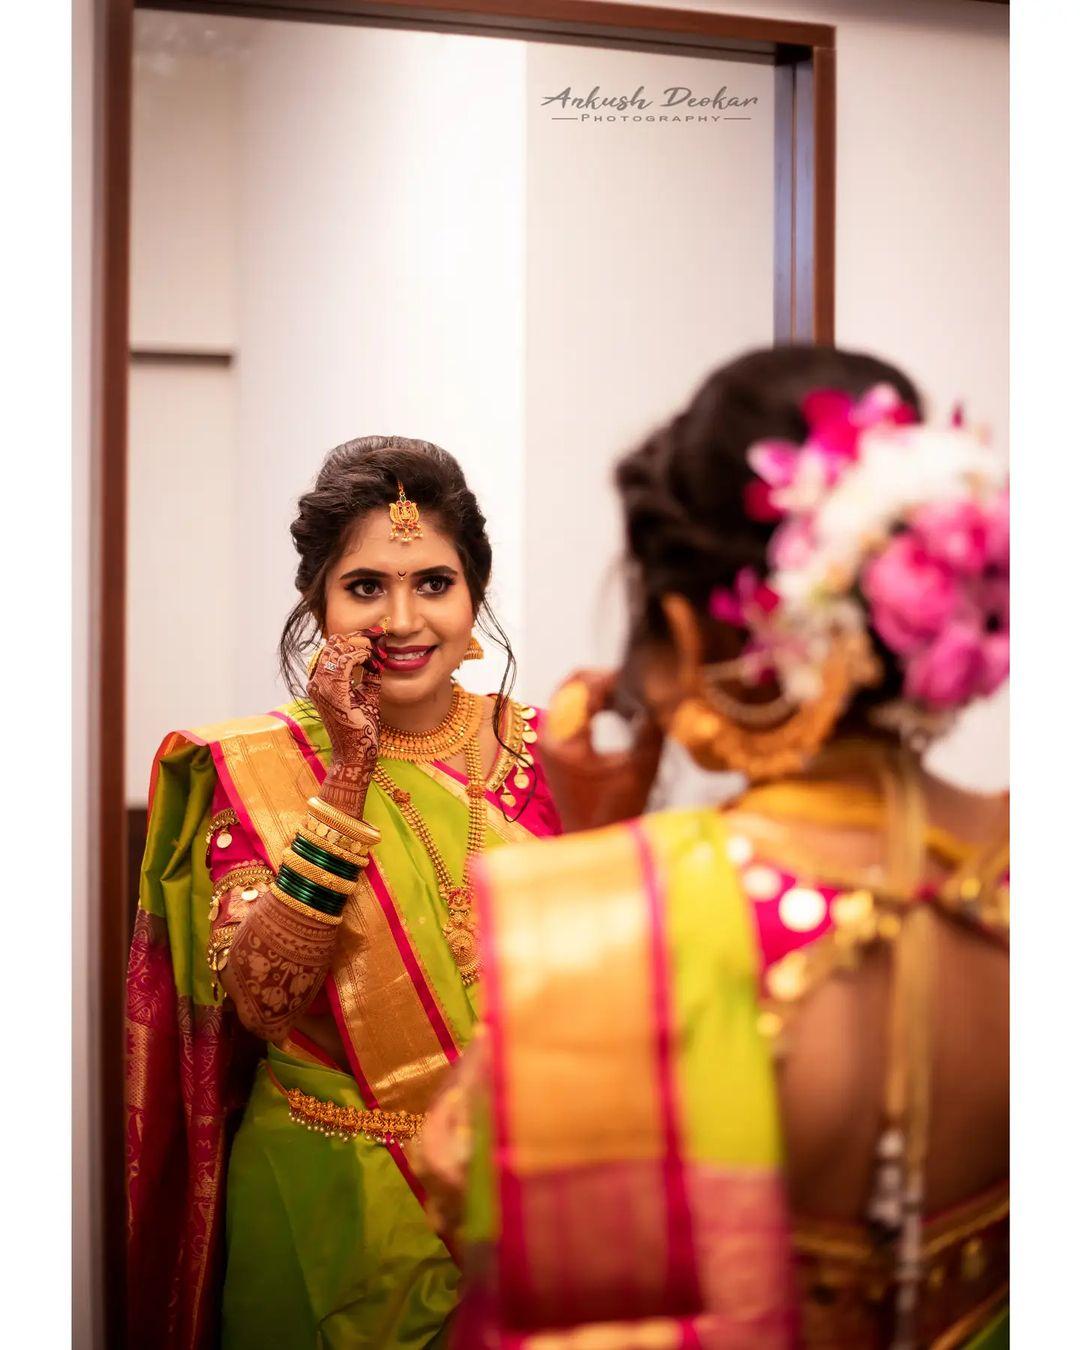 Mom-to-be Aswathy Sreekanth radiates pregnancy glow in these Valaikaapu  pictures | Times of India